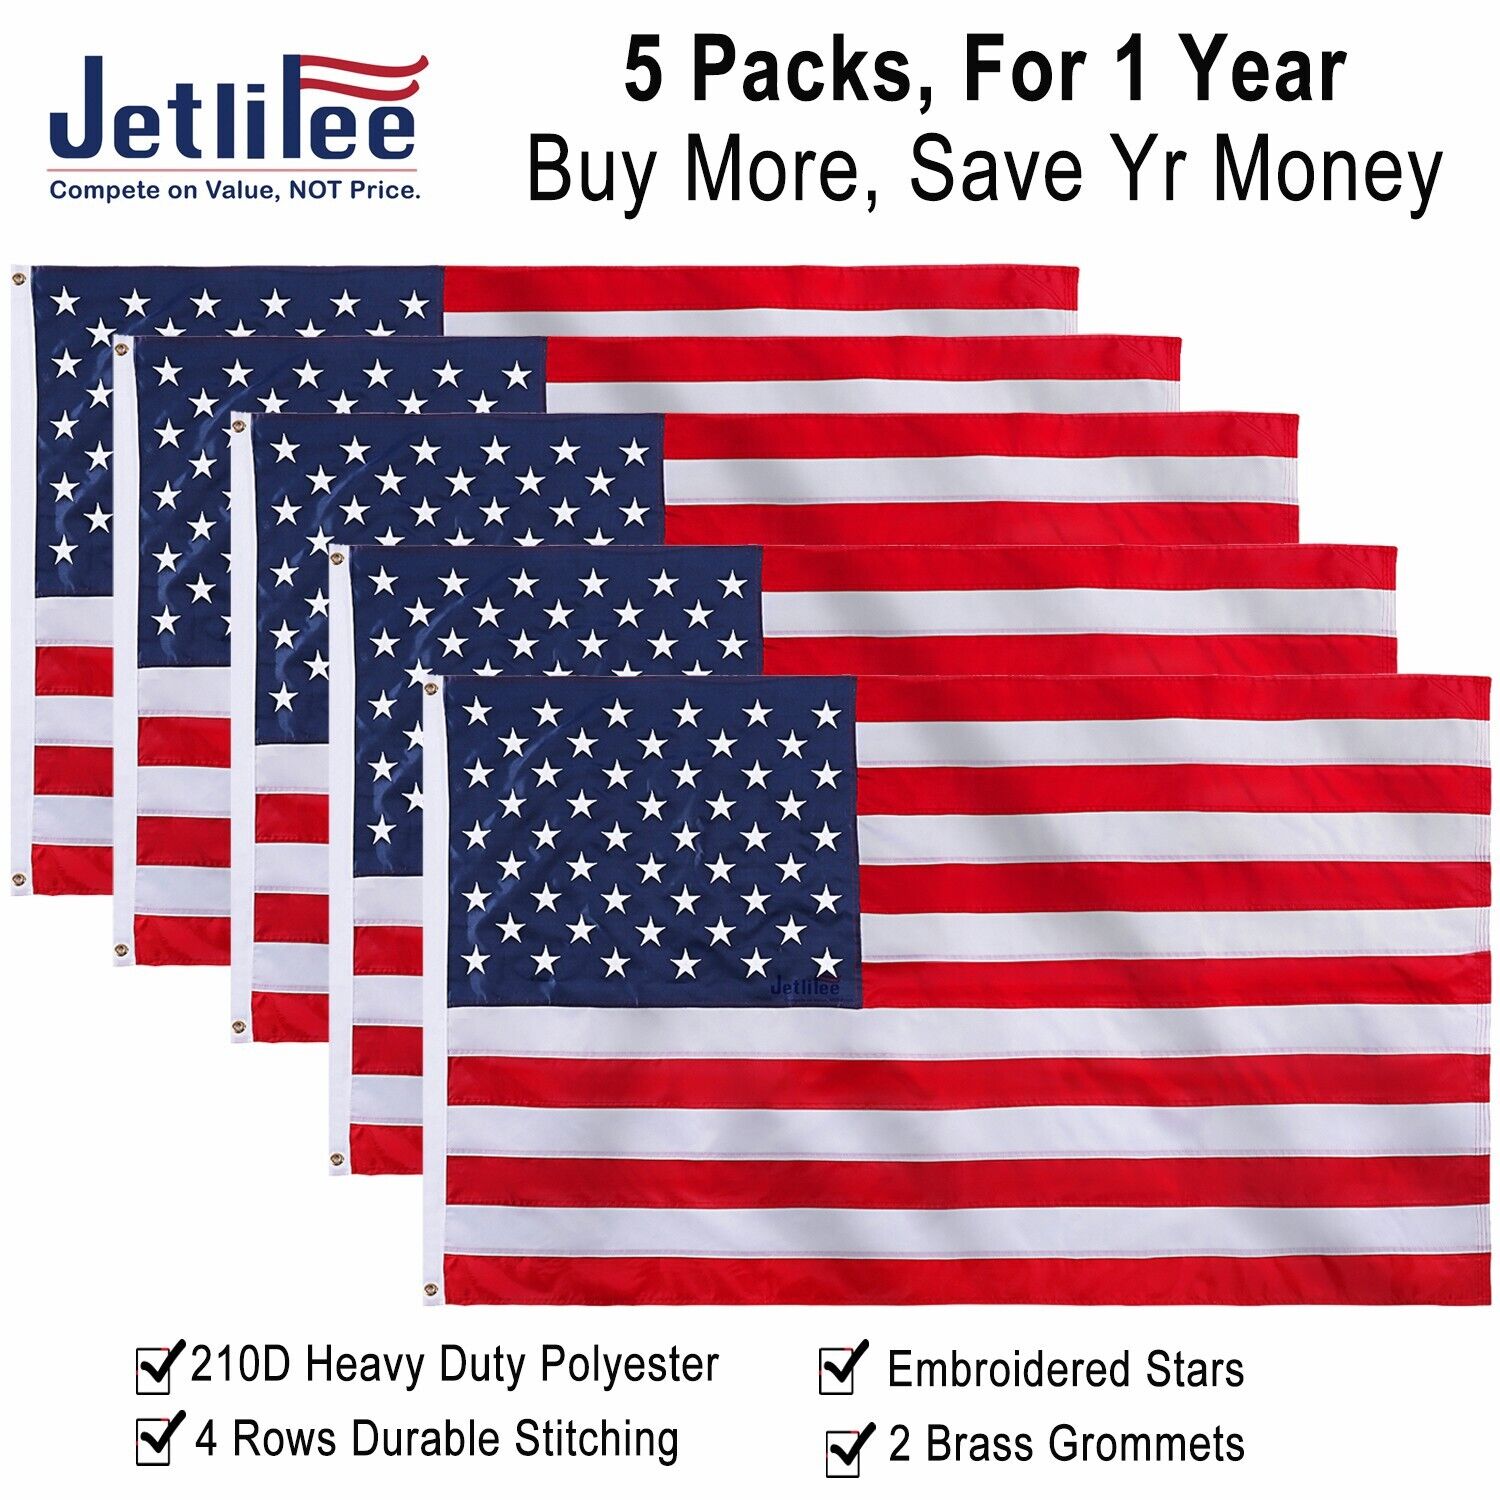 Jetlifee 5 Packs 4x6 FT American US Flag Banner Heavy Duty 210D Embroidered